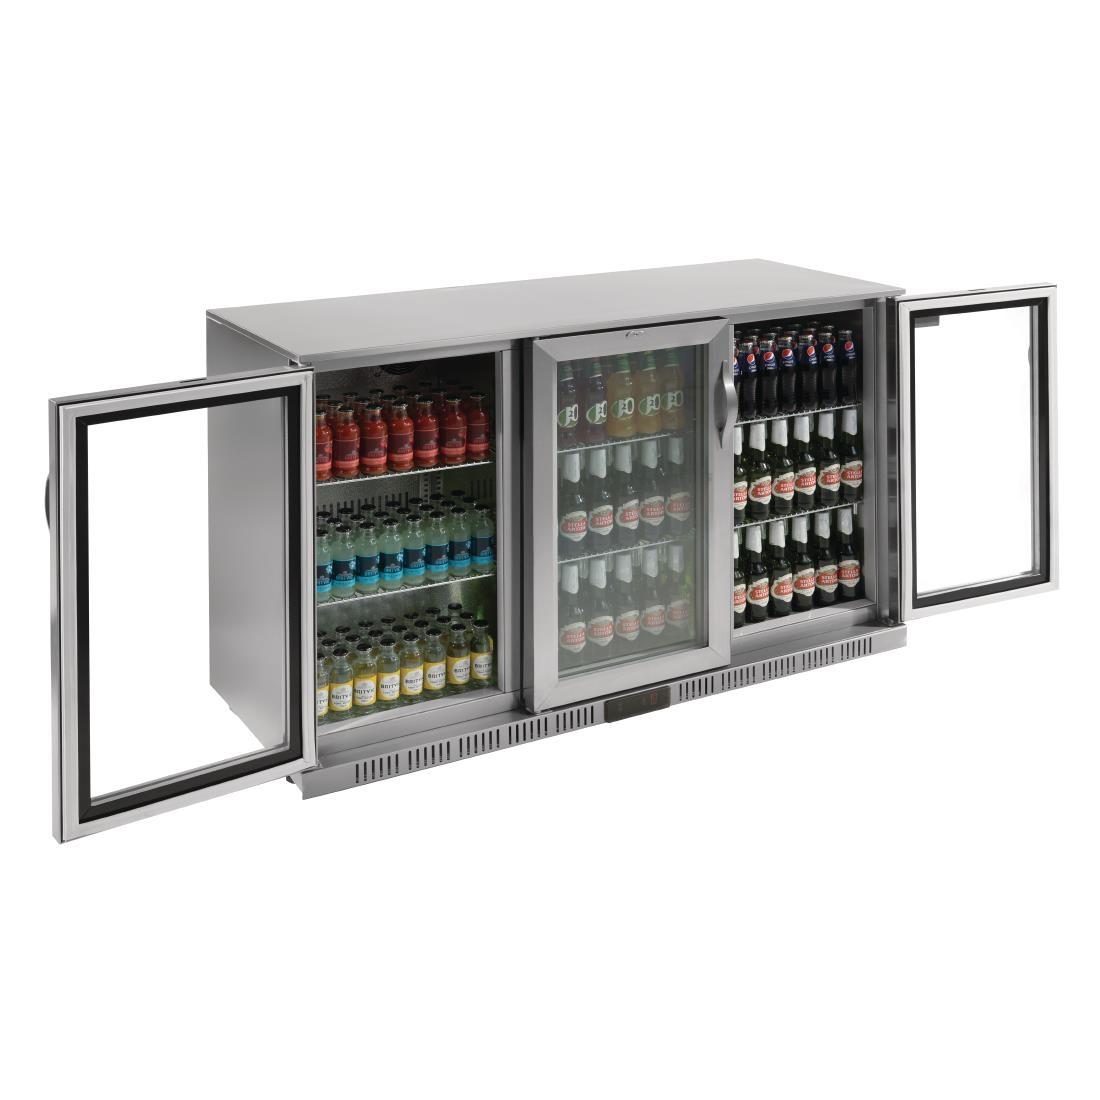 Polar G-Series Back Bar Cooler with Hinged Doors Stainless Steel 330Ltr - GL009  - 2